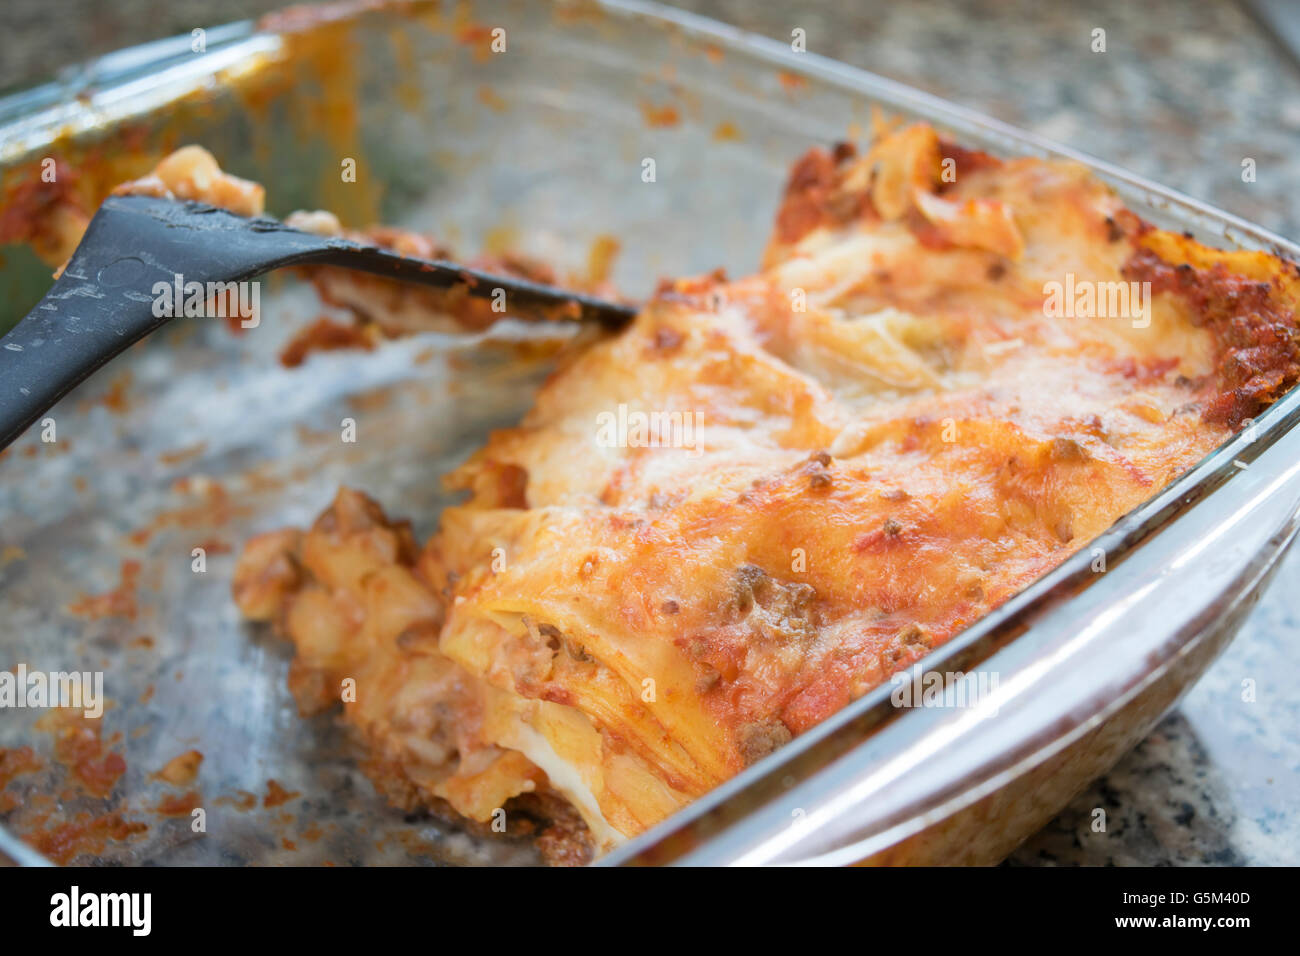 portion of lasagne at the bolognese sauce Stock Photo